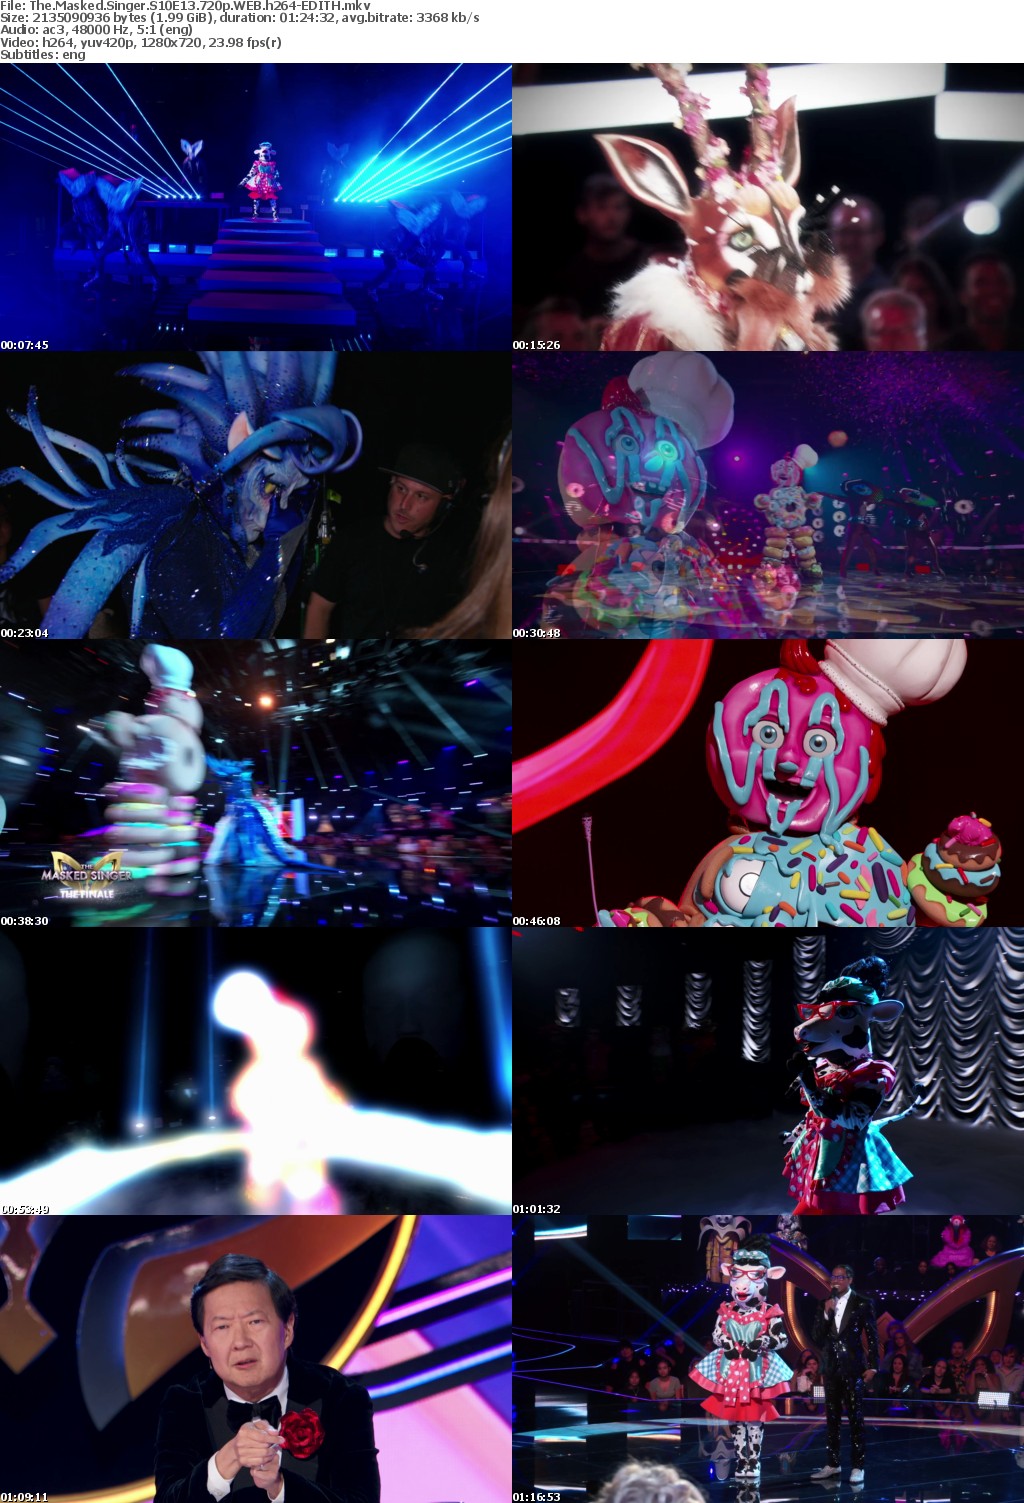 The Masked Singer S10E13 720p WEB h264-EDITH